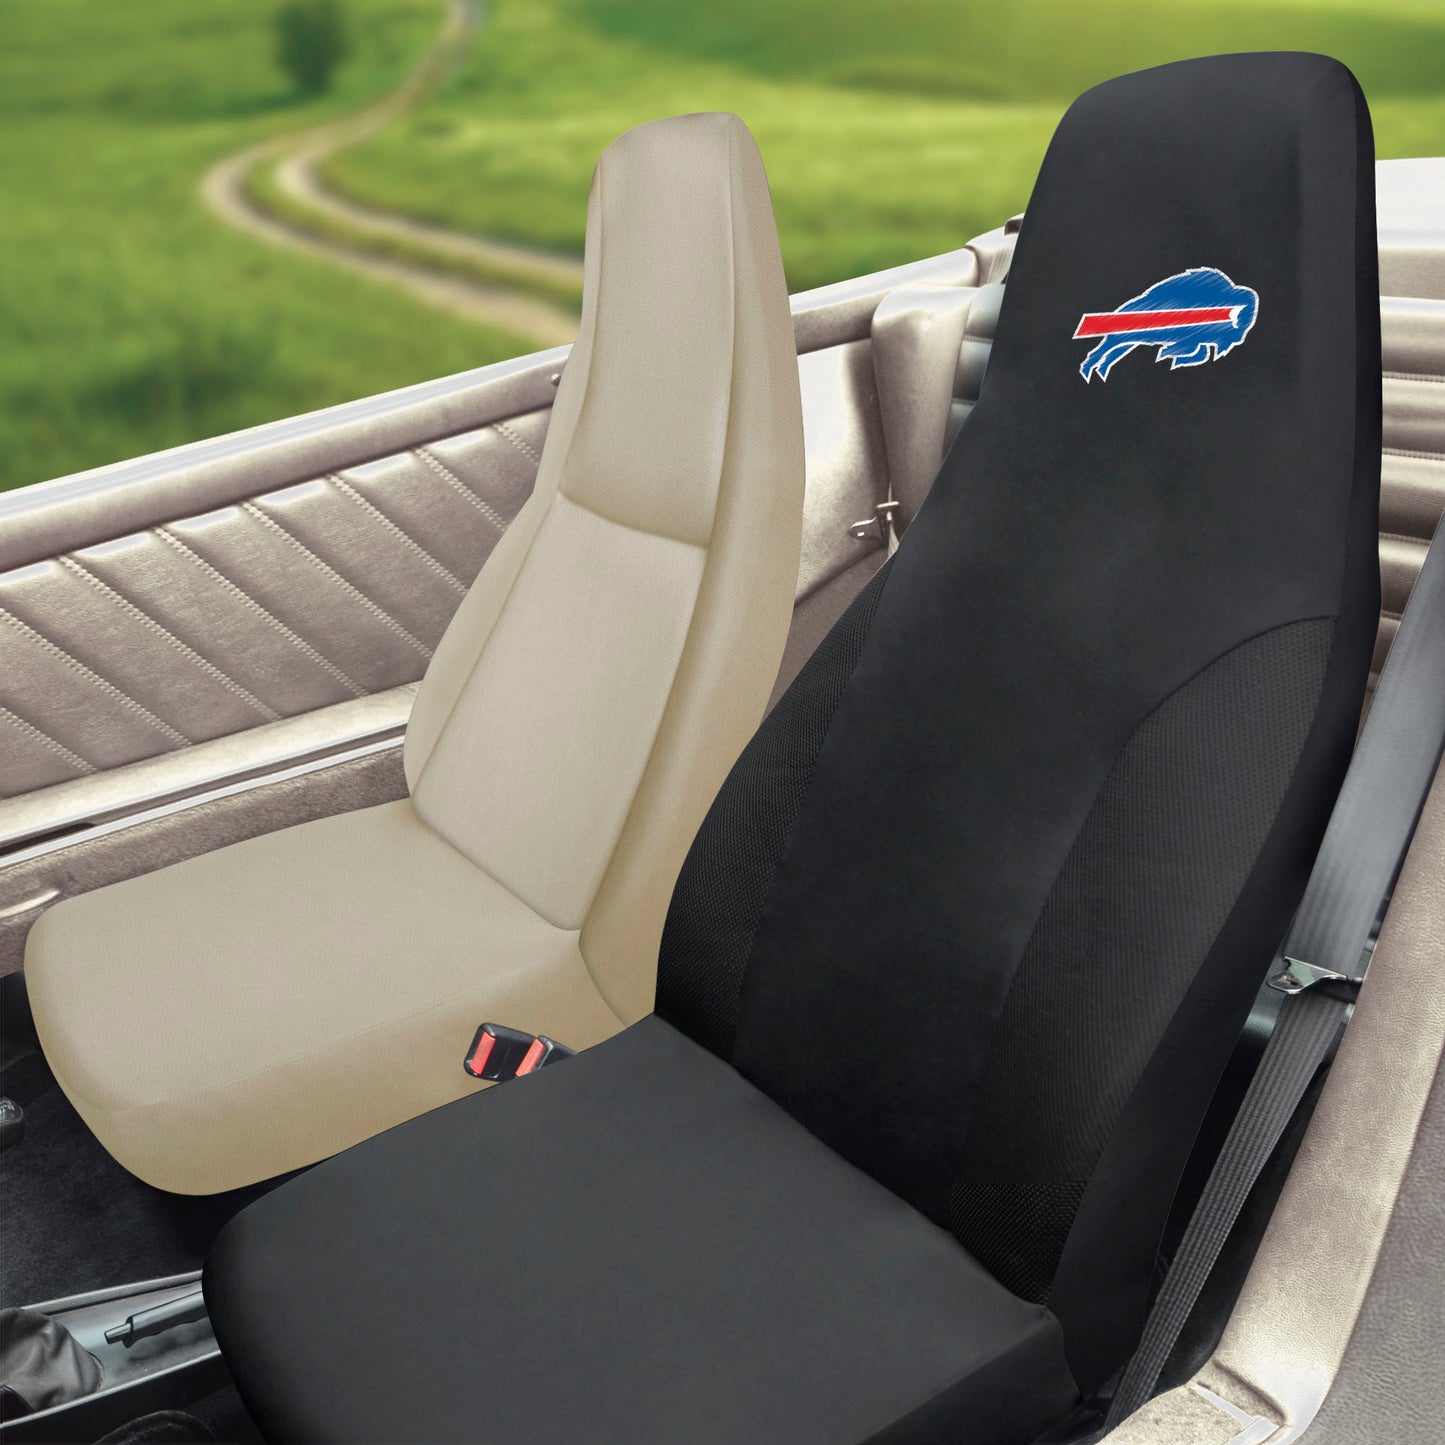 Buffalo Bills Embroidered Seat Cover